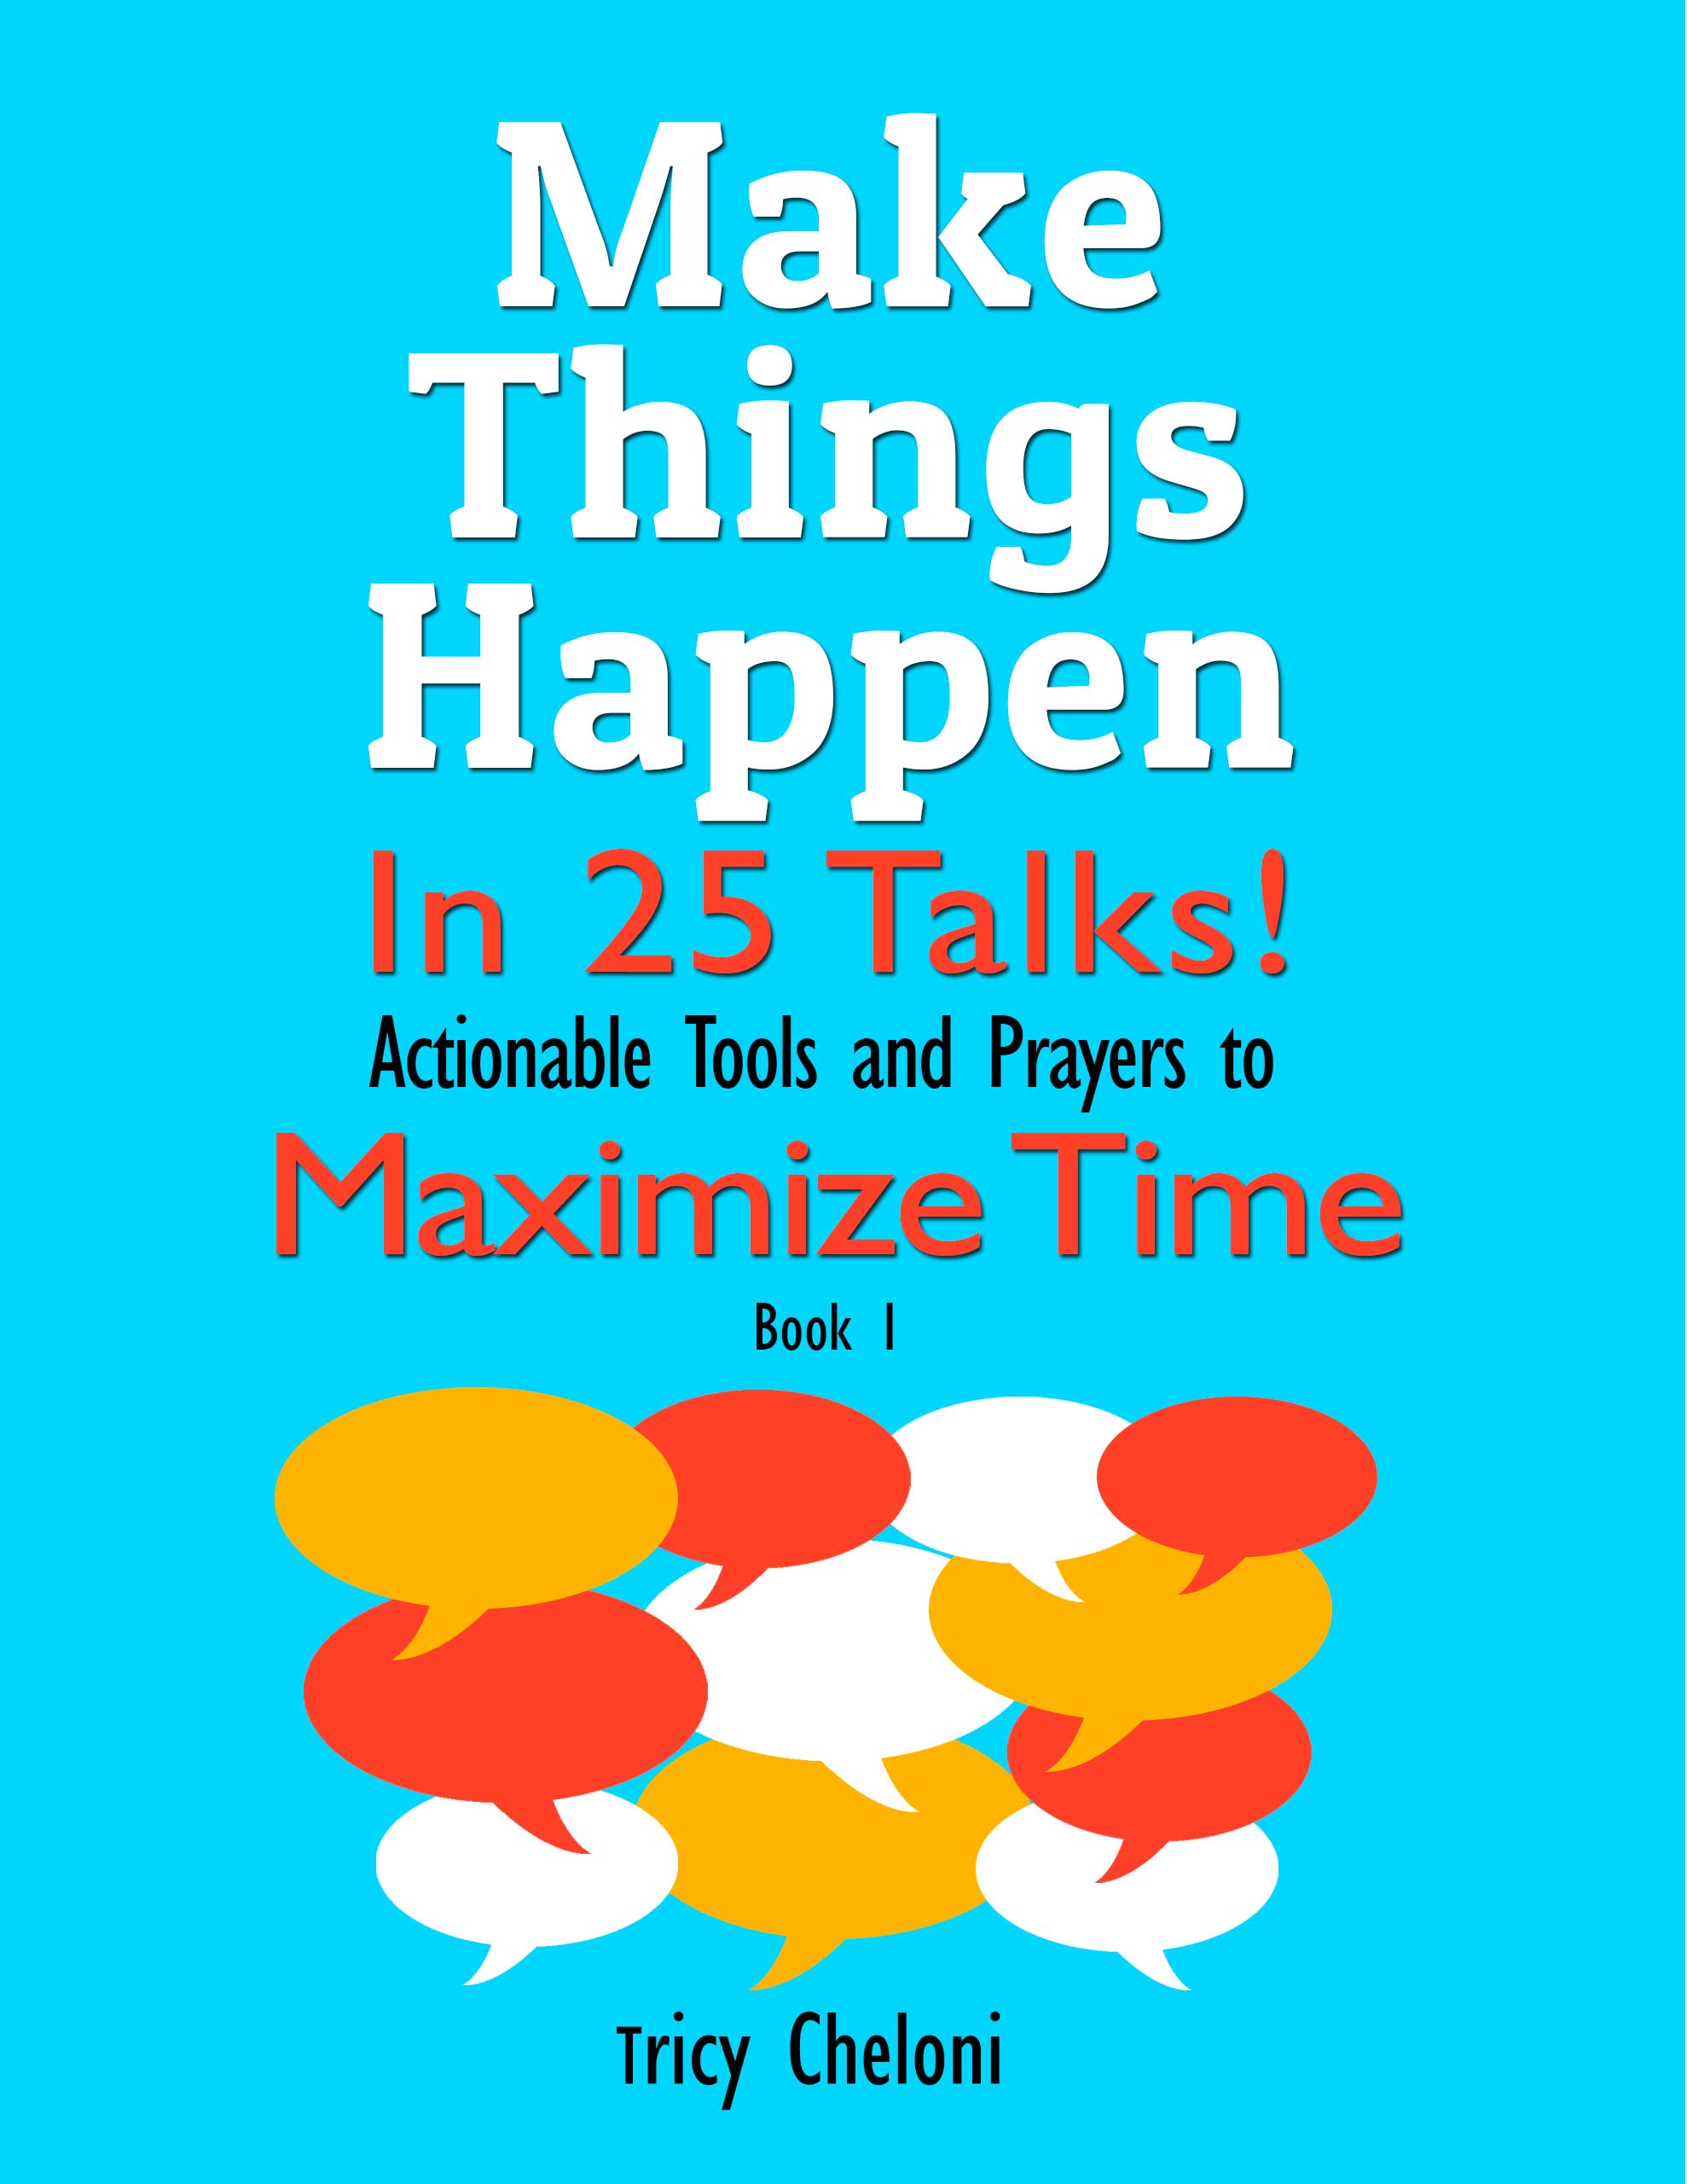 FREE: Make Things Happen in 25 Talks! by Tricy Cheloni by Tricy Cheloni